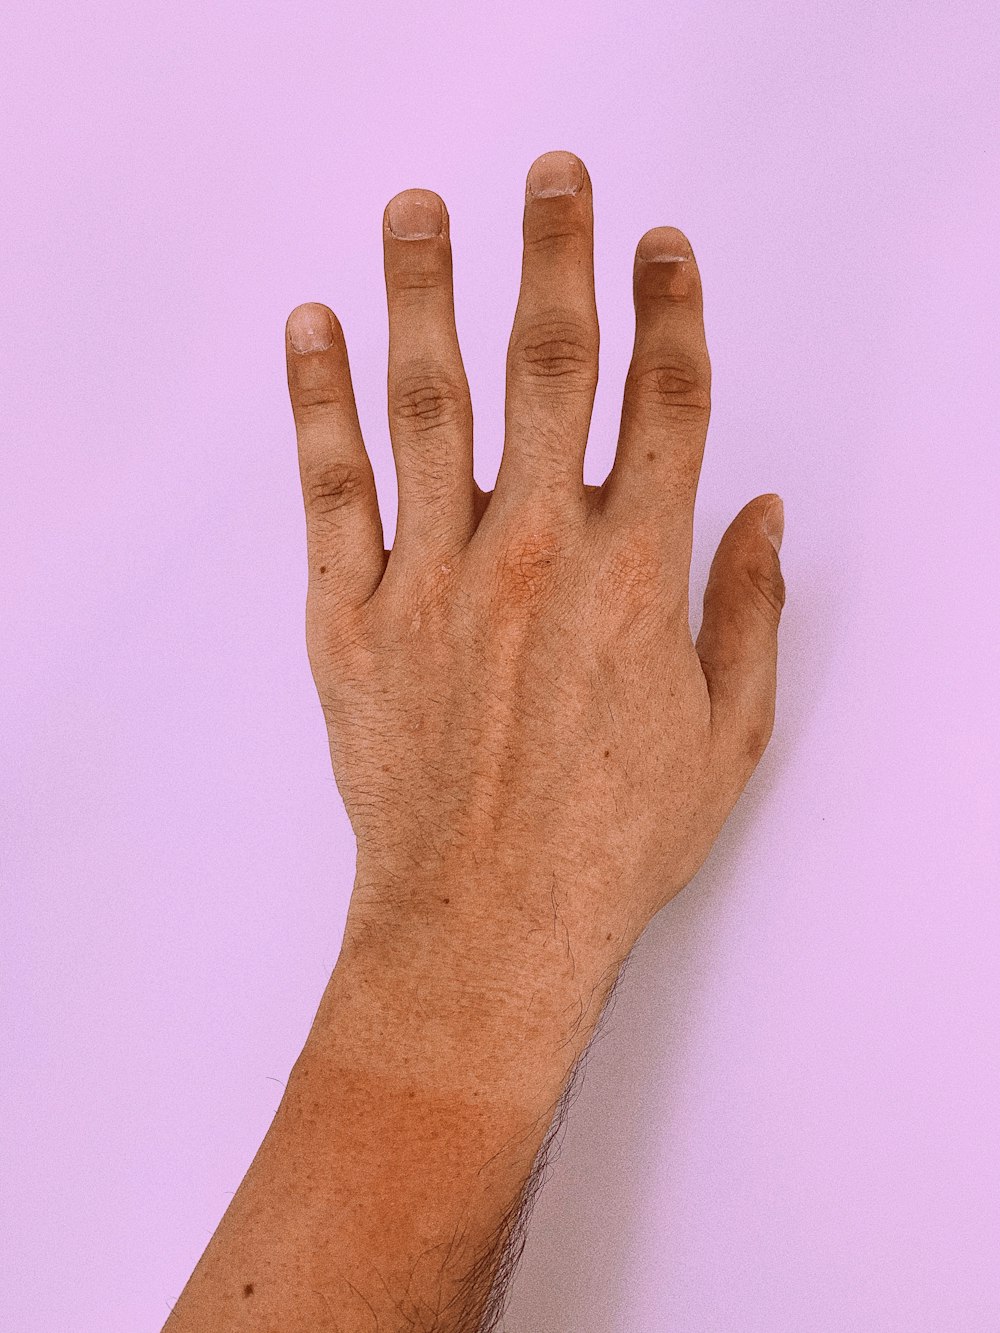 persons left hand on white surface